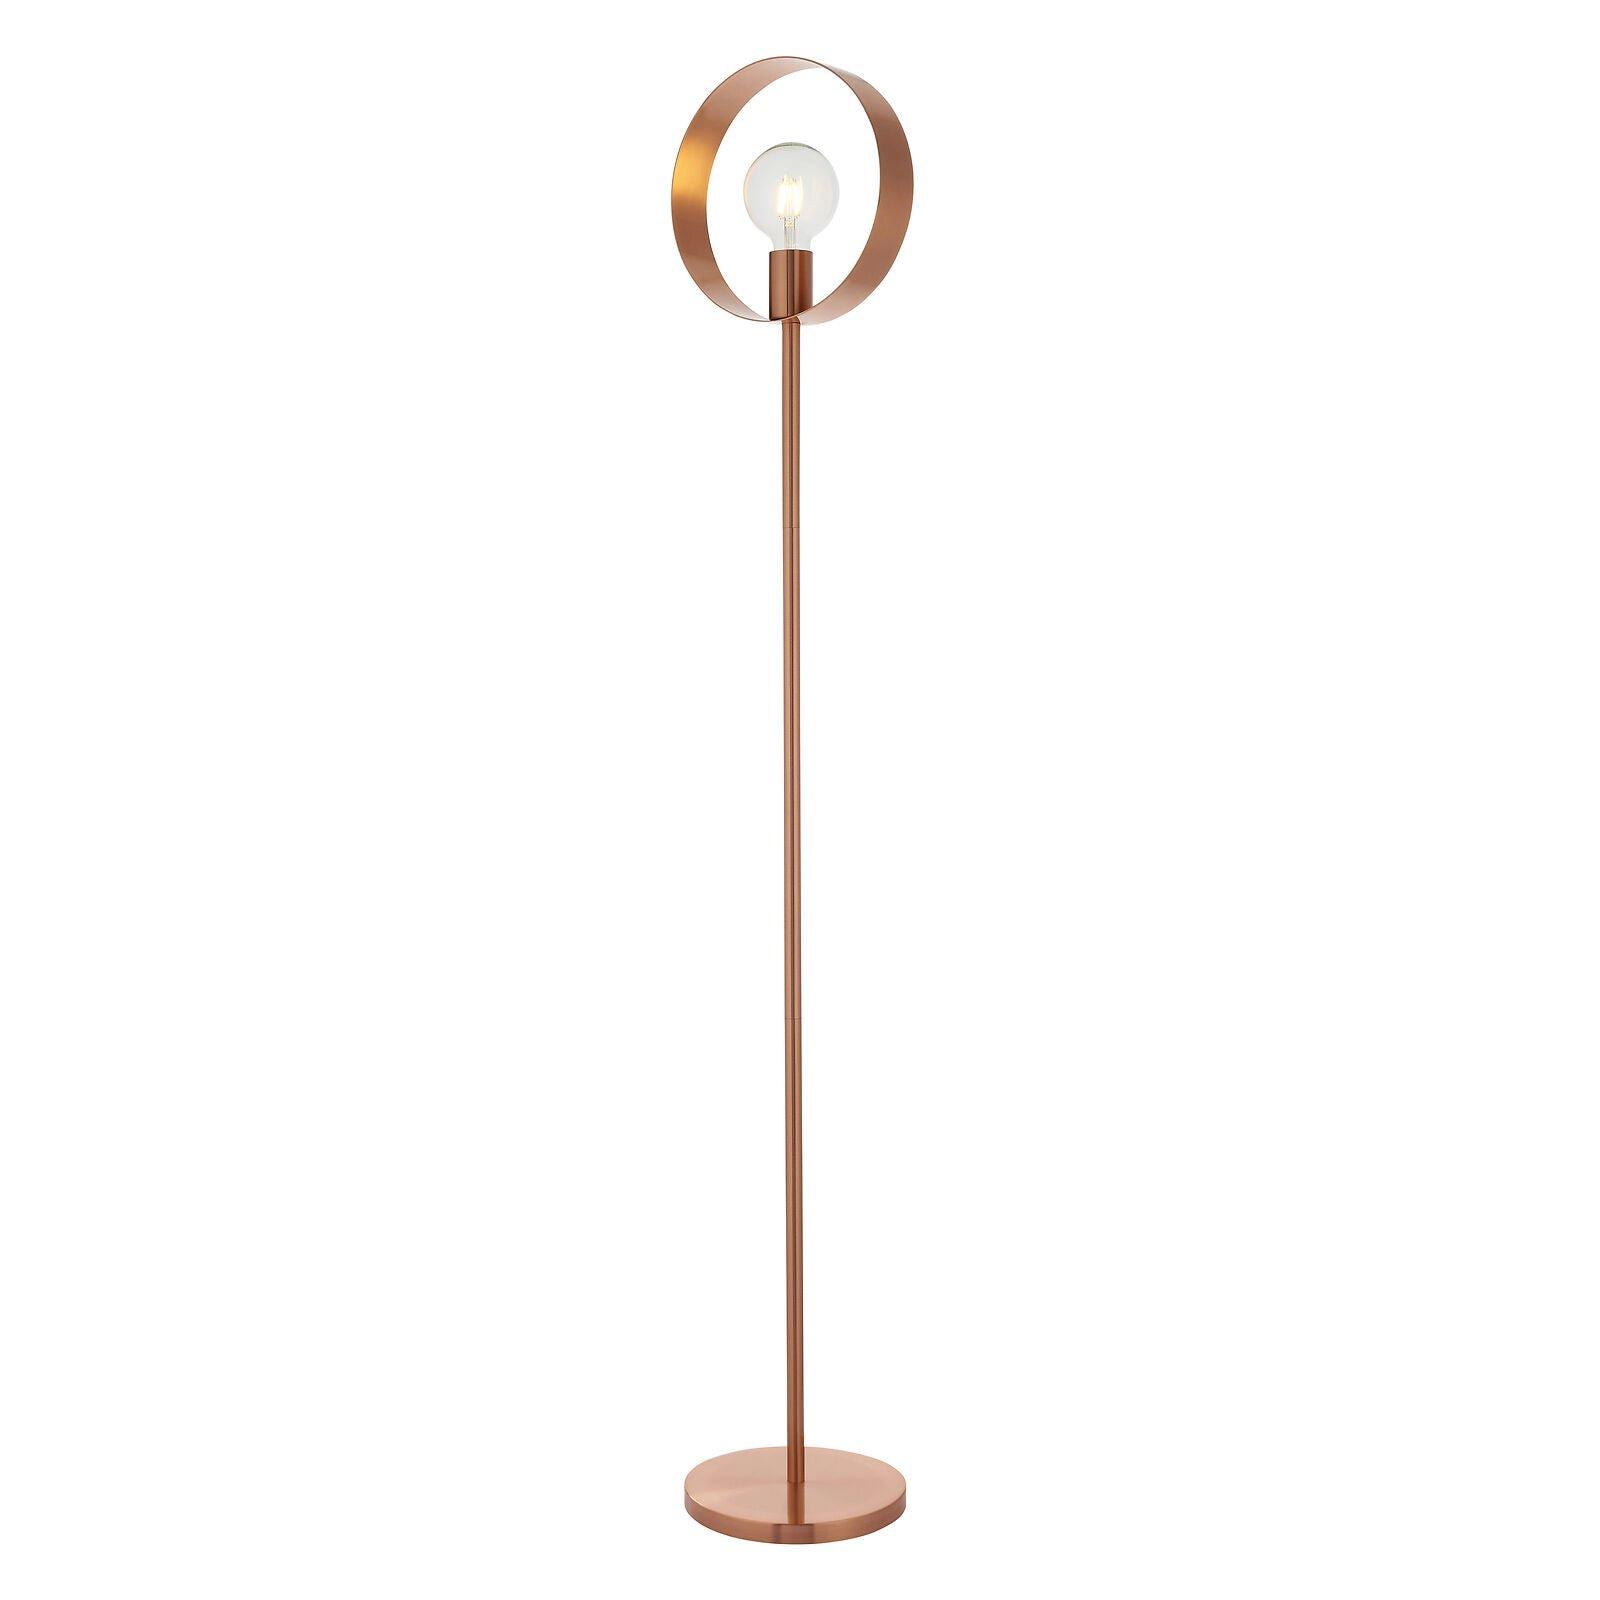 Floor Lamp Light - Brushed Copper Plate - 40W E27 - Complete Standing Lamp